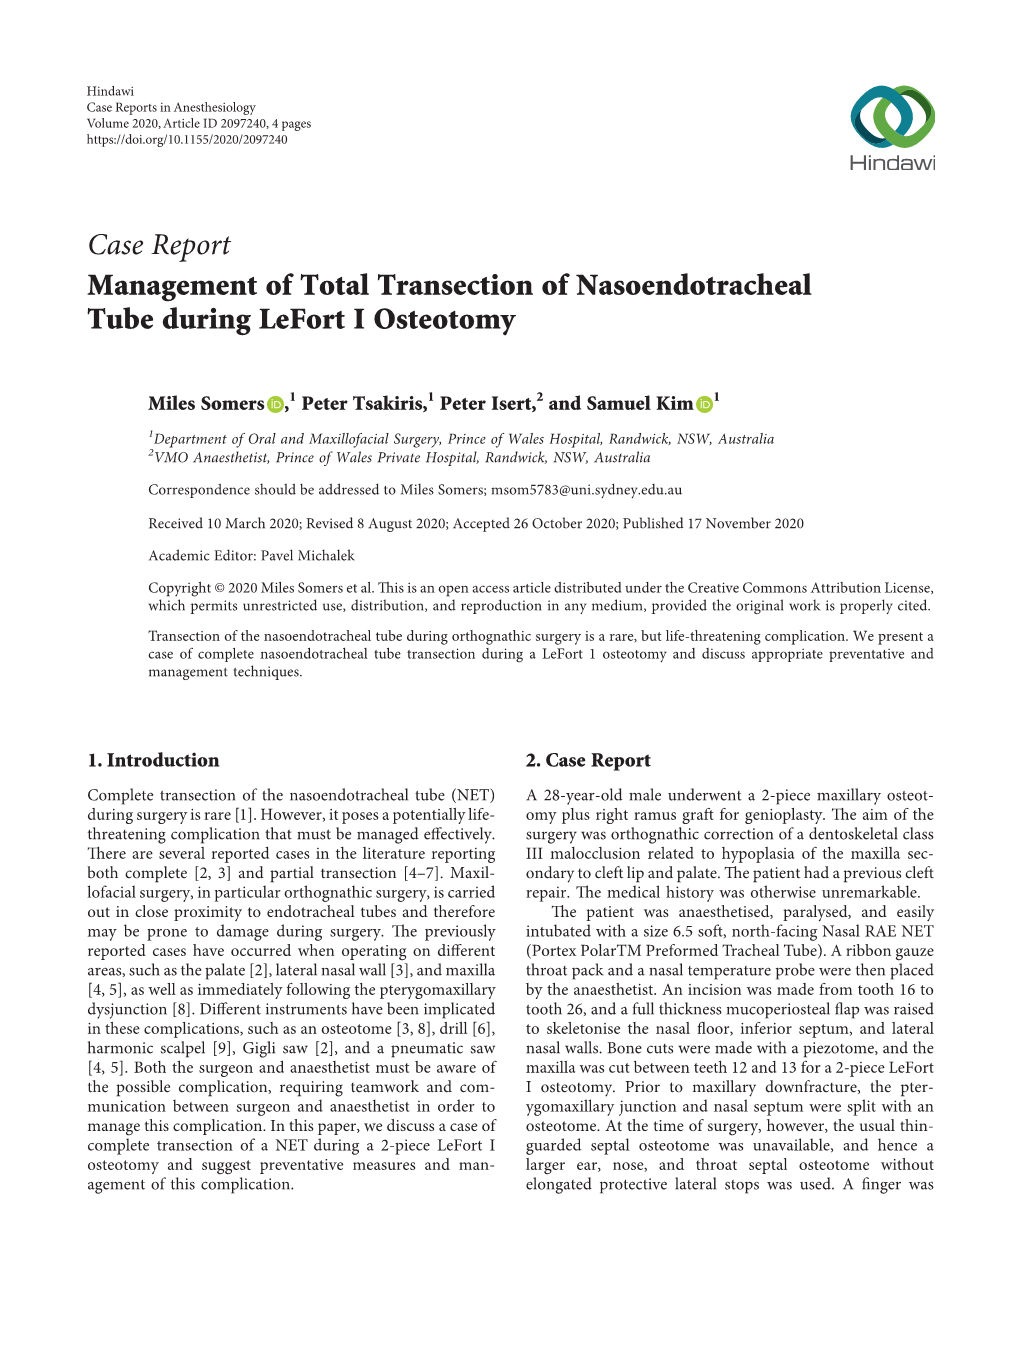 Case Report Management of Total Transection of Nasoendotracheal Tube During Lefort I Osteotomy